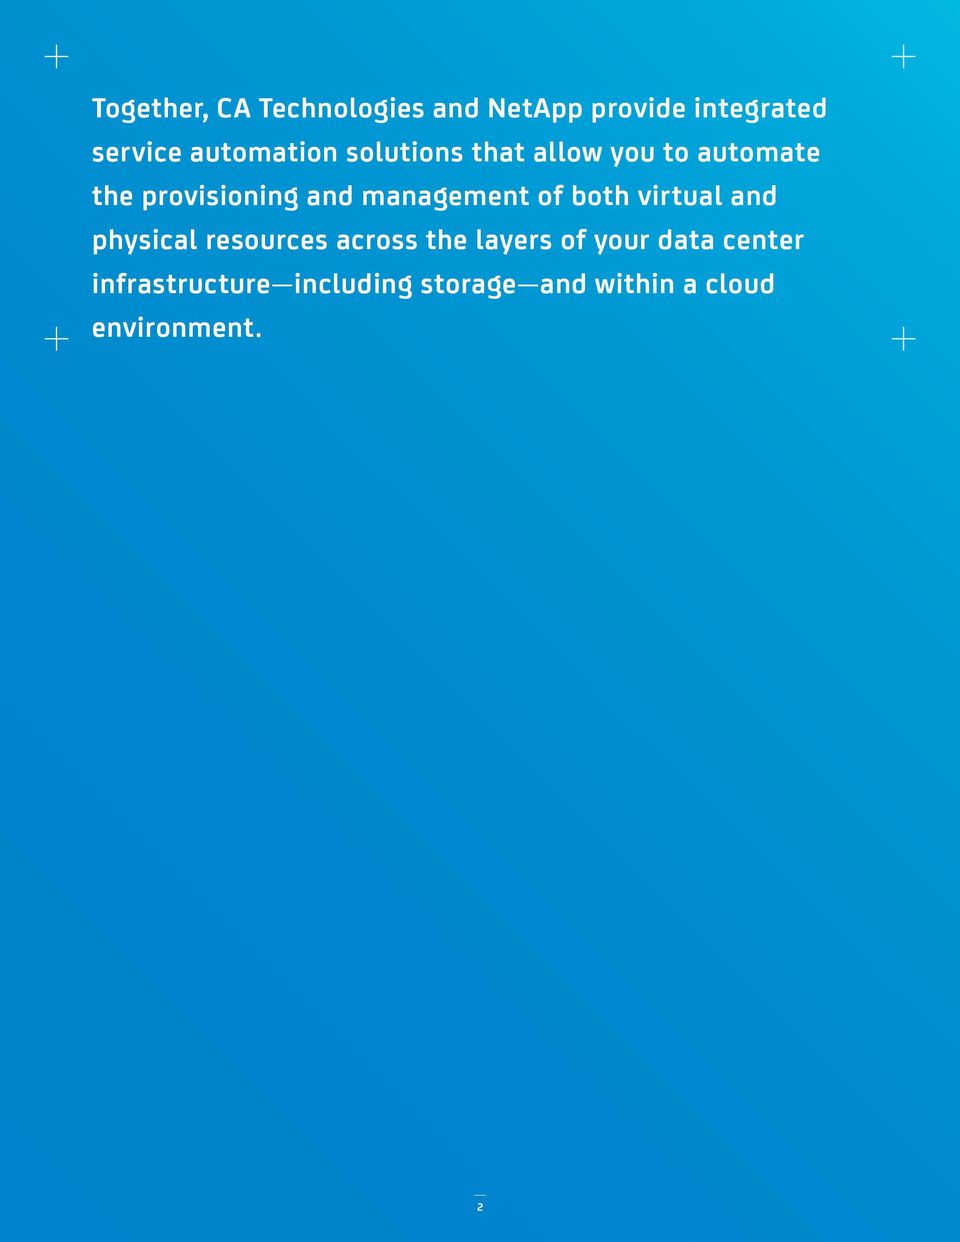 management of both virtual and physical resources across the layers of